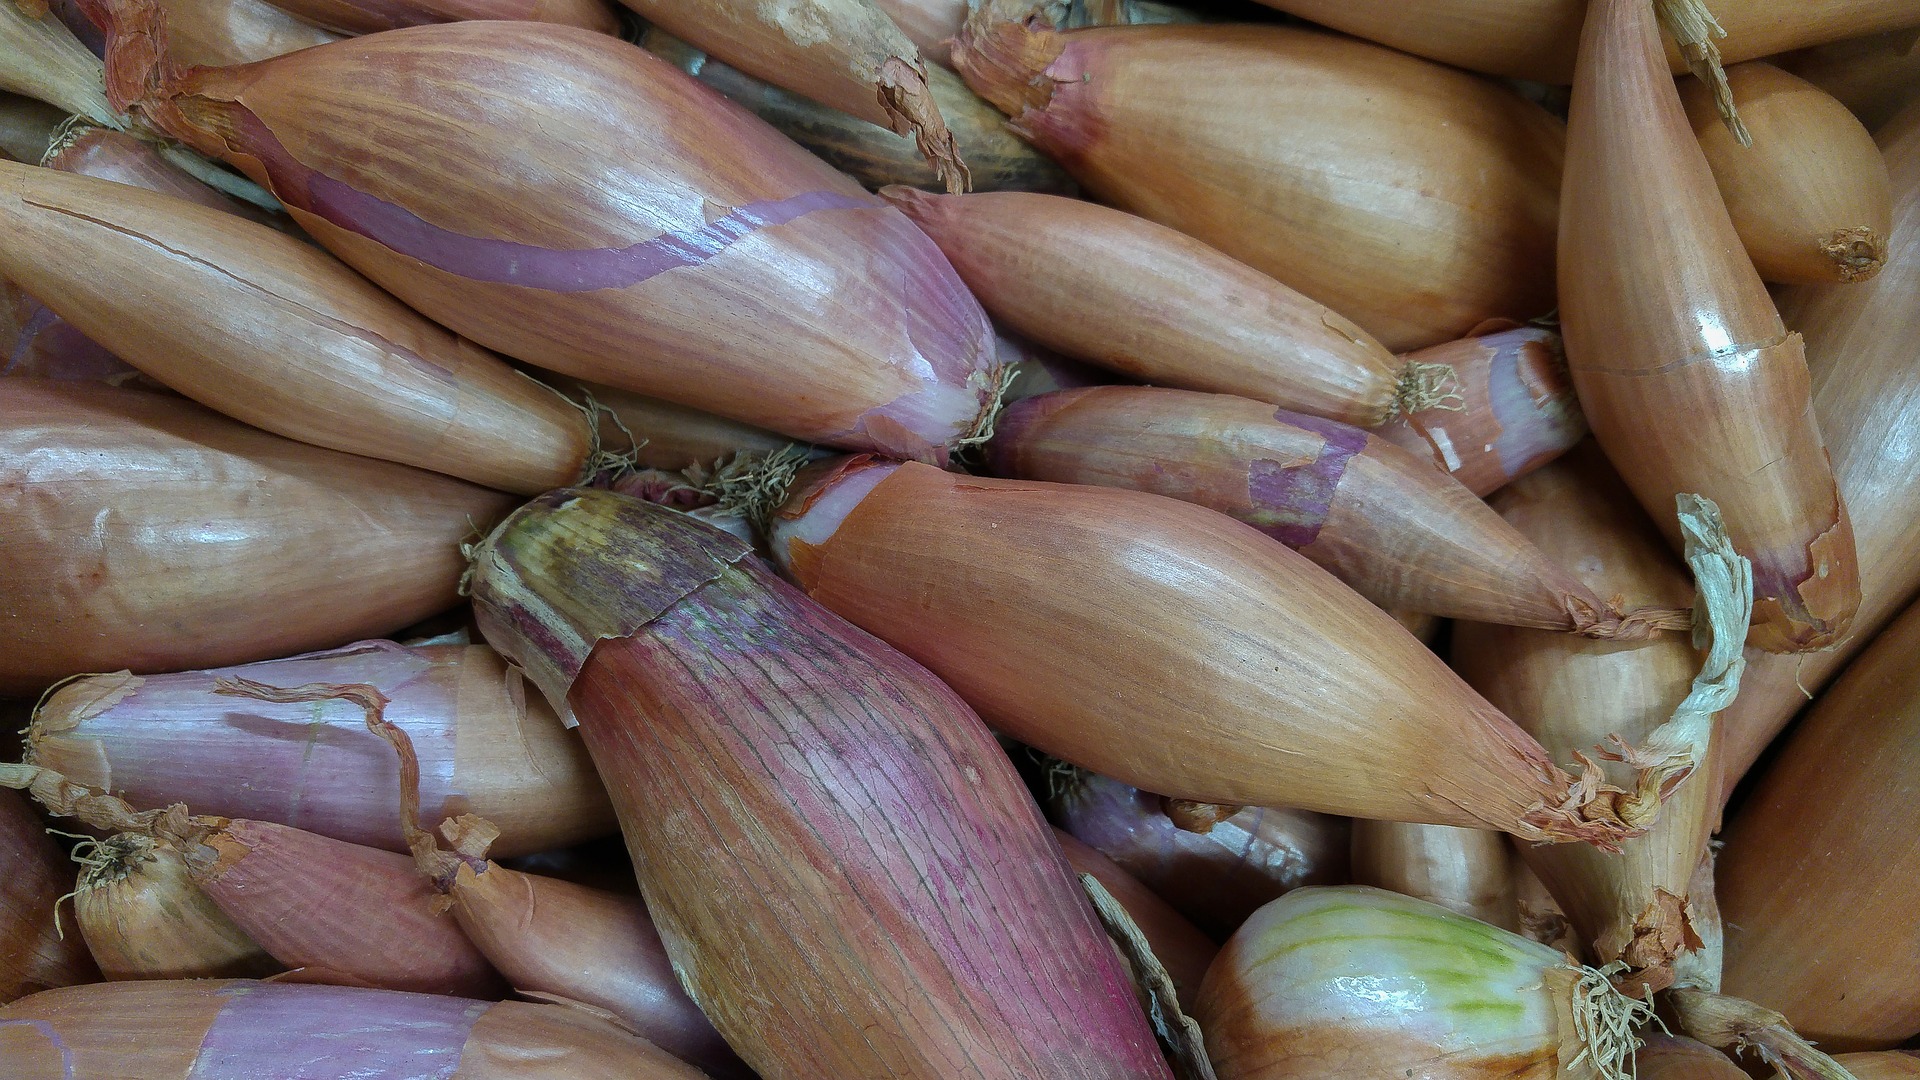 What Is the Difference Between an Onion and a Shallot?